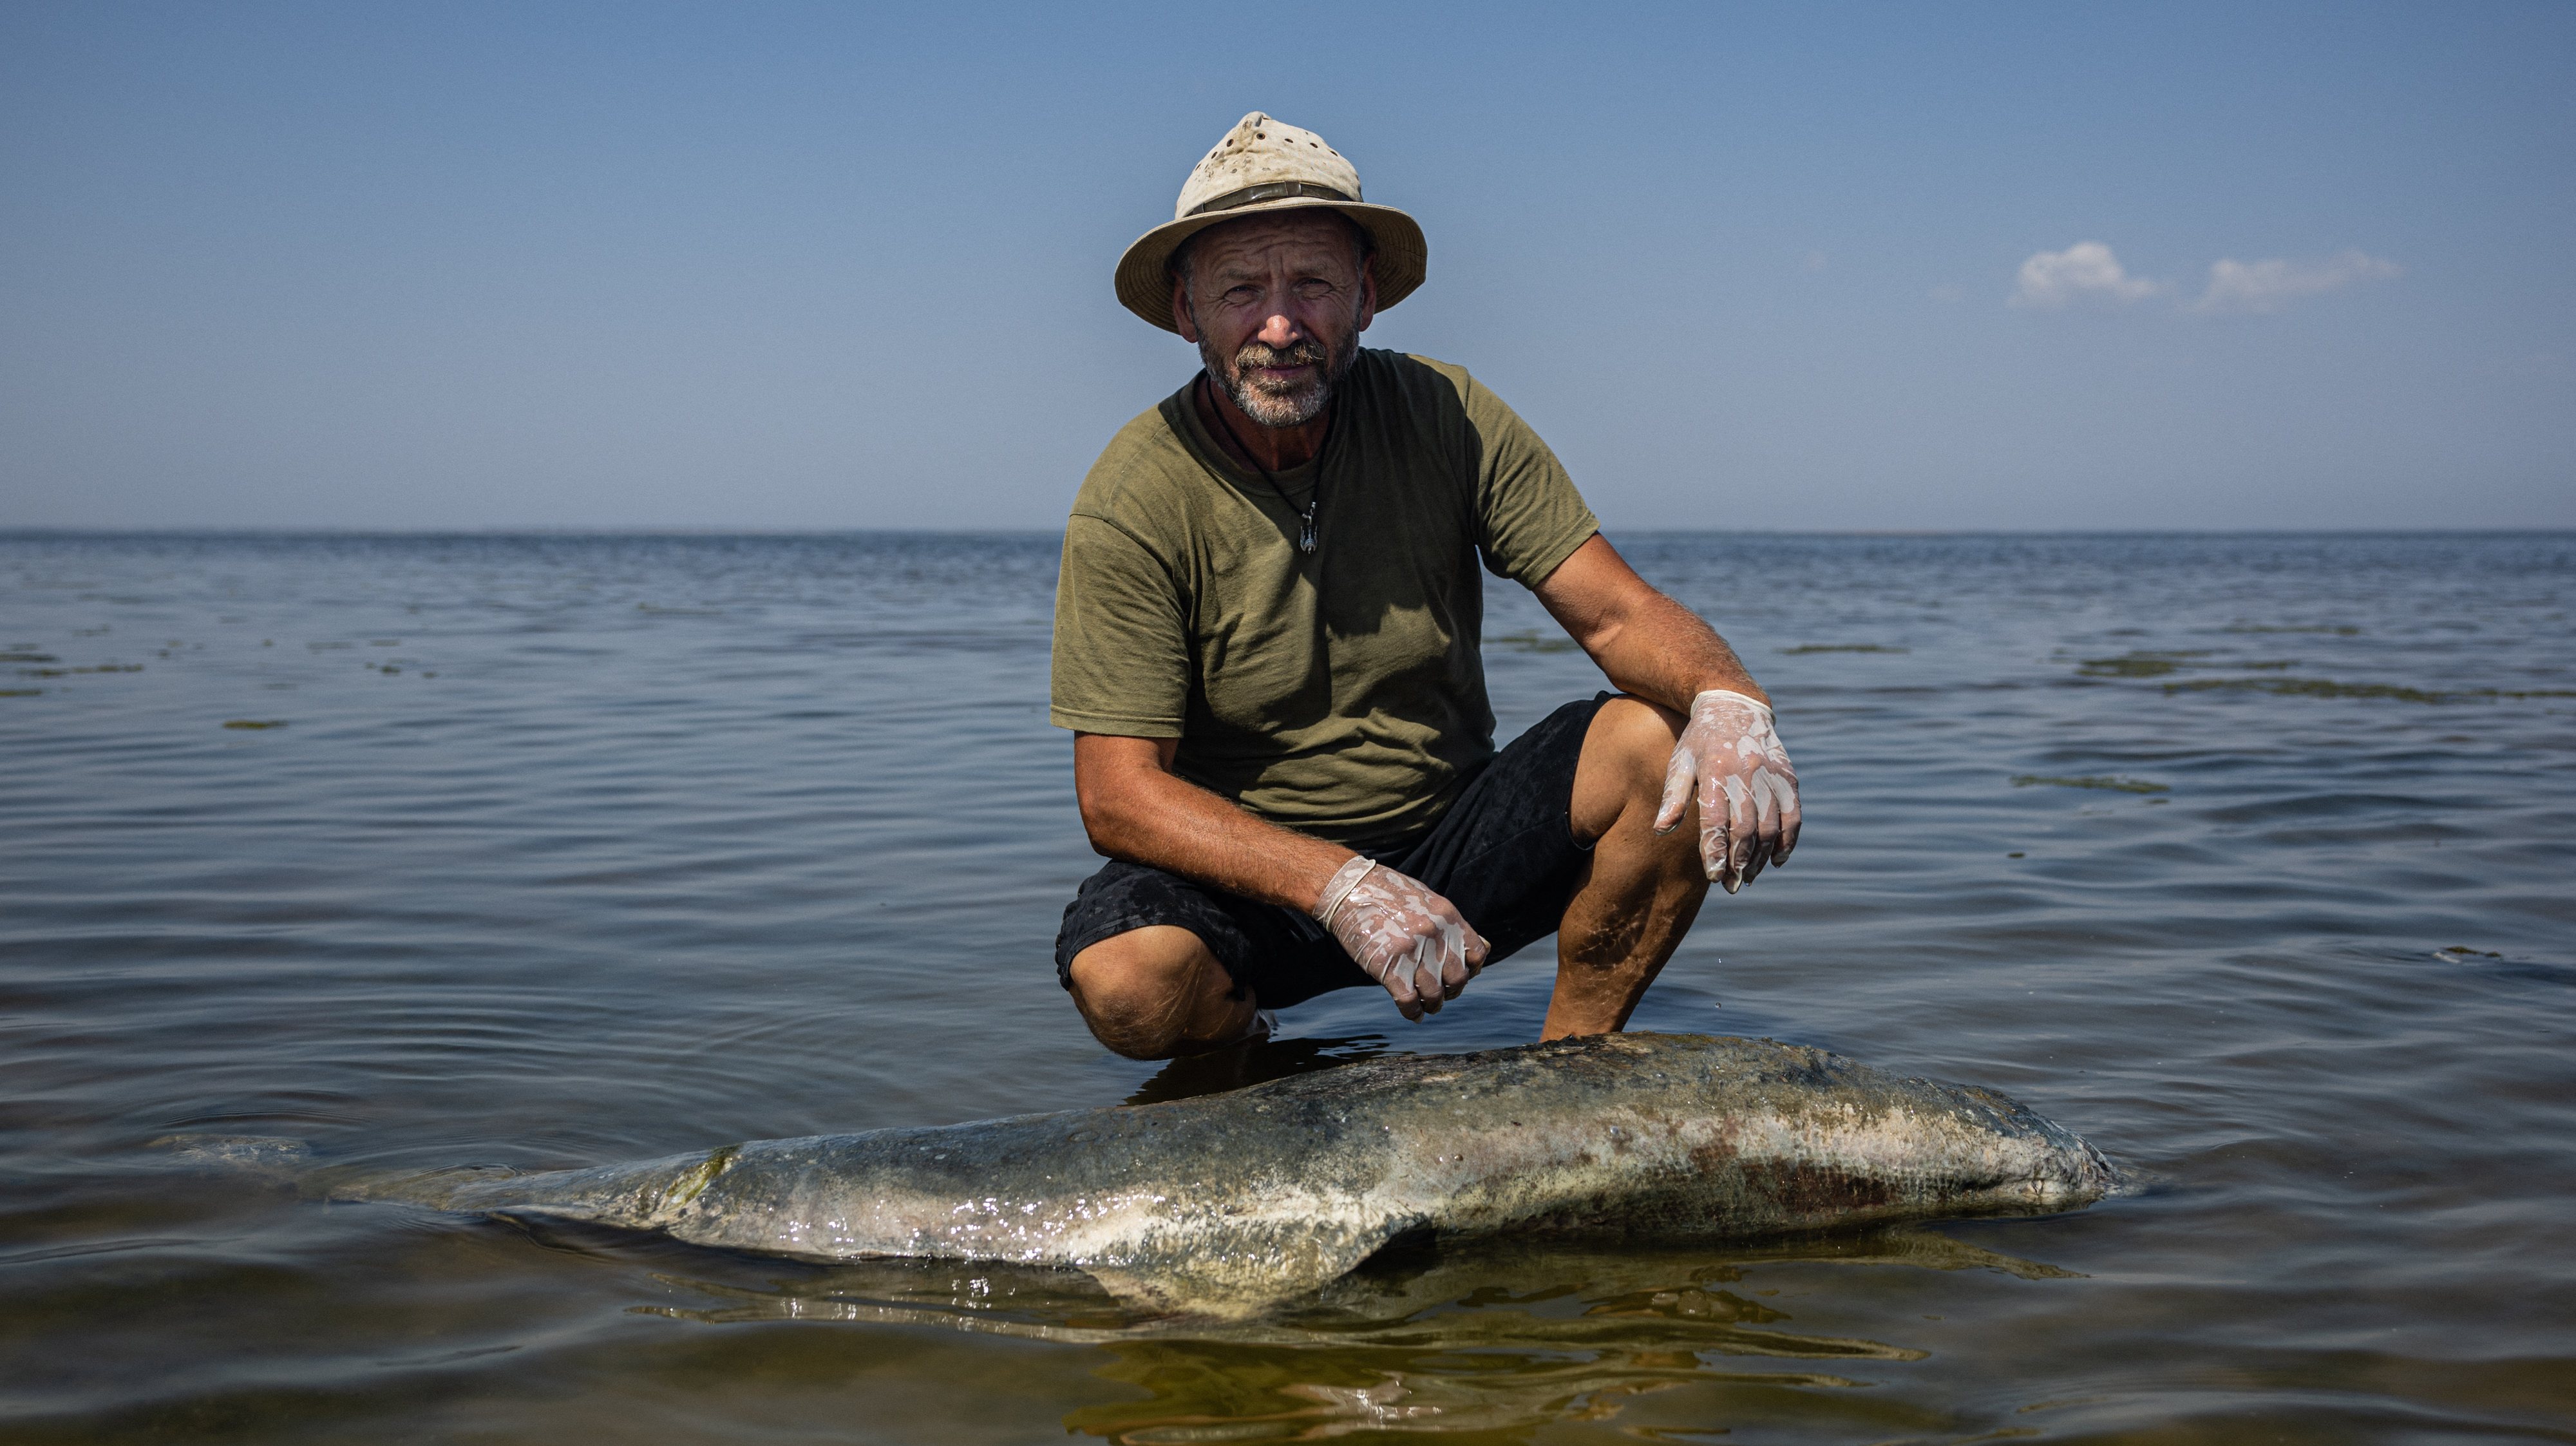 Scientist Ivan Roussev examines a dead dolphin at the Limans Tuzly Lagoons National Nature Park, near the village of Prymorske on August 28, 2022, amid the Russian invasion of Ukraine